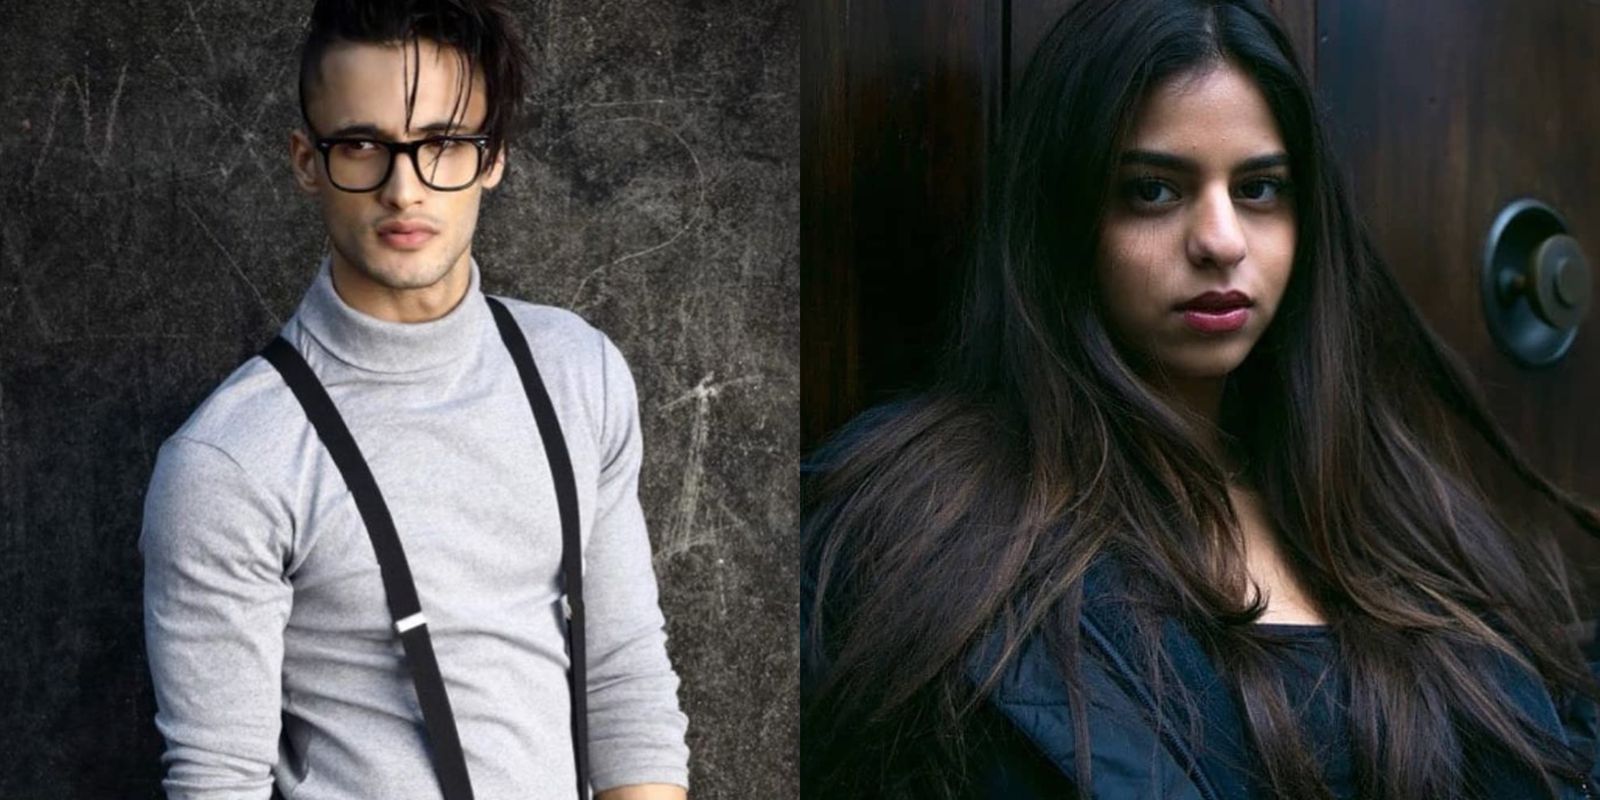 Karan Johar Puts An End To Rumours Stating He'll Launch Asim Riaz With Suhana Khan In SOTY 3 Says, 'Stop! Please!'